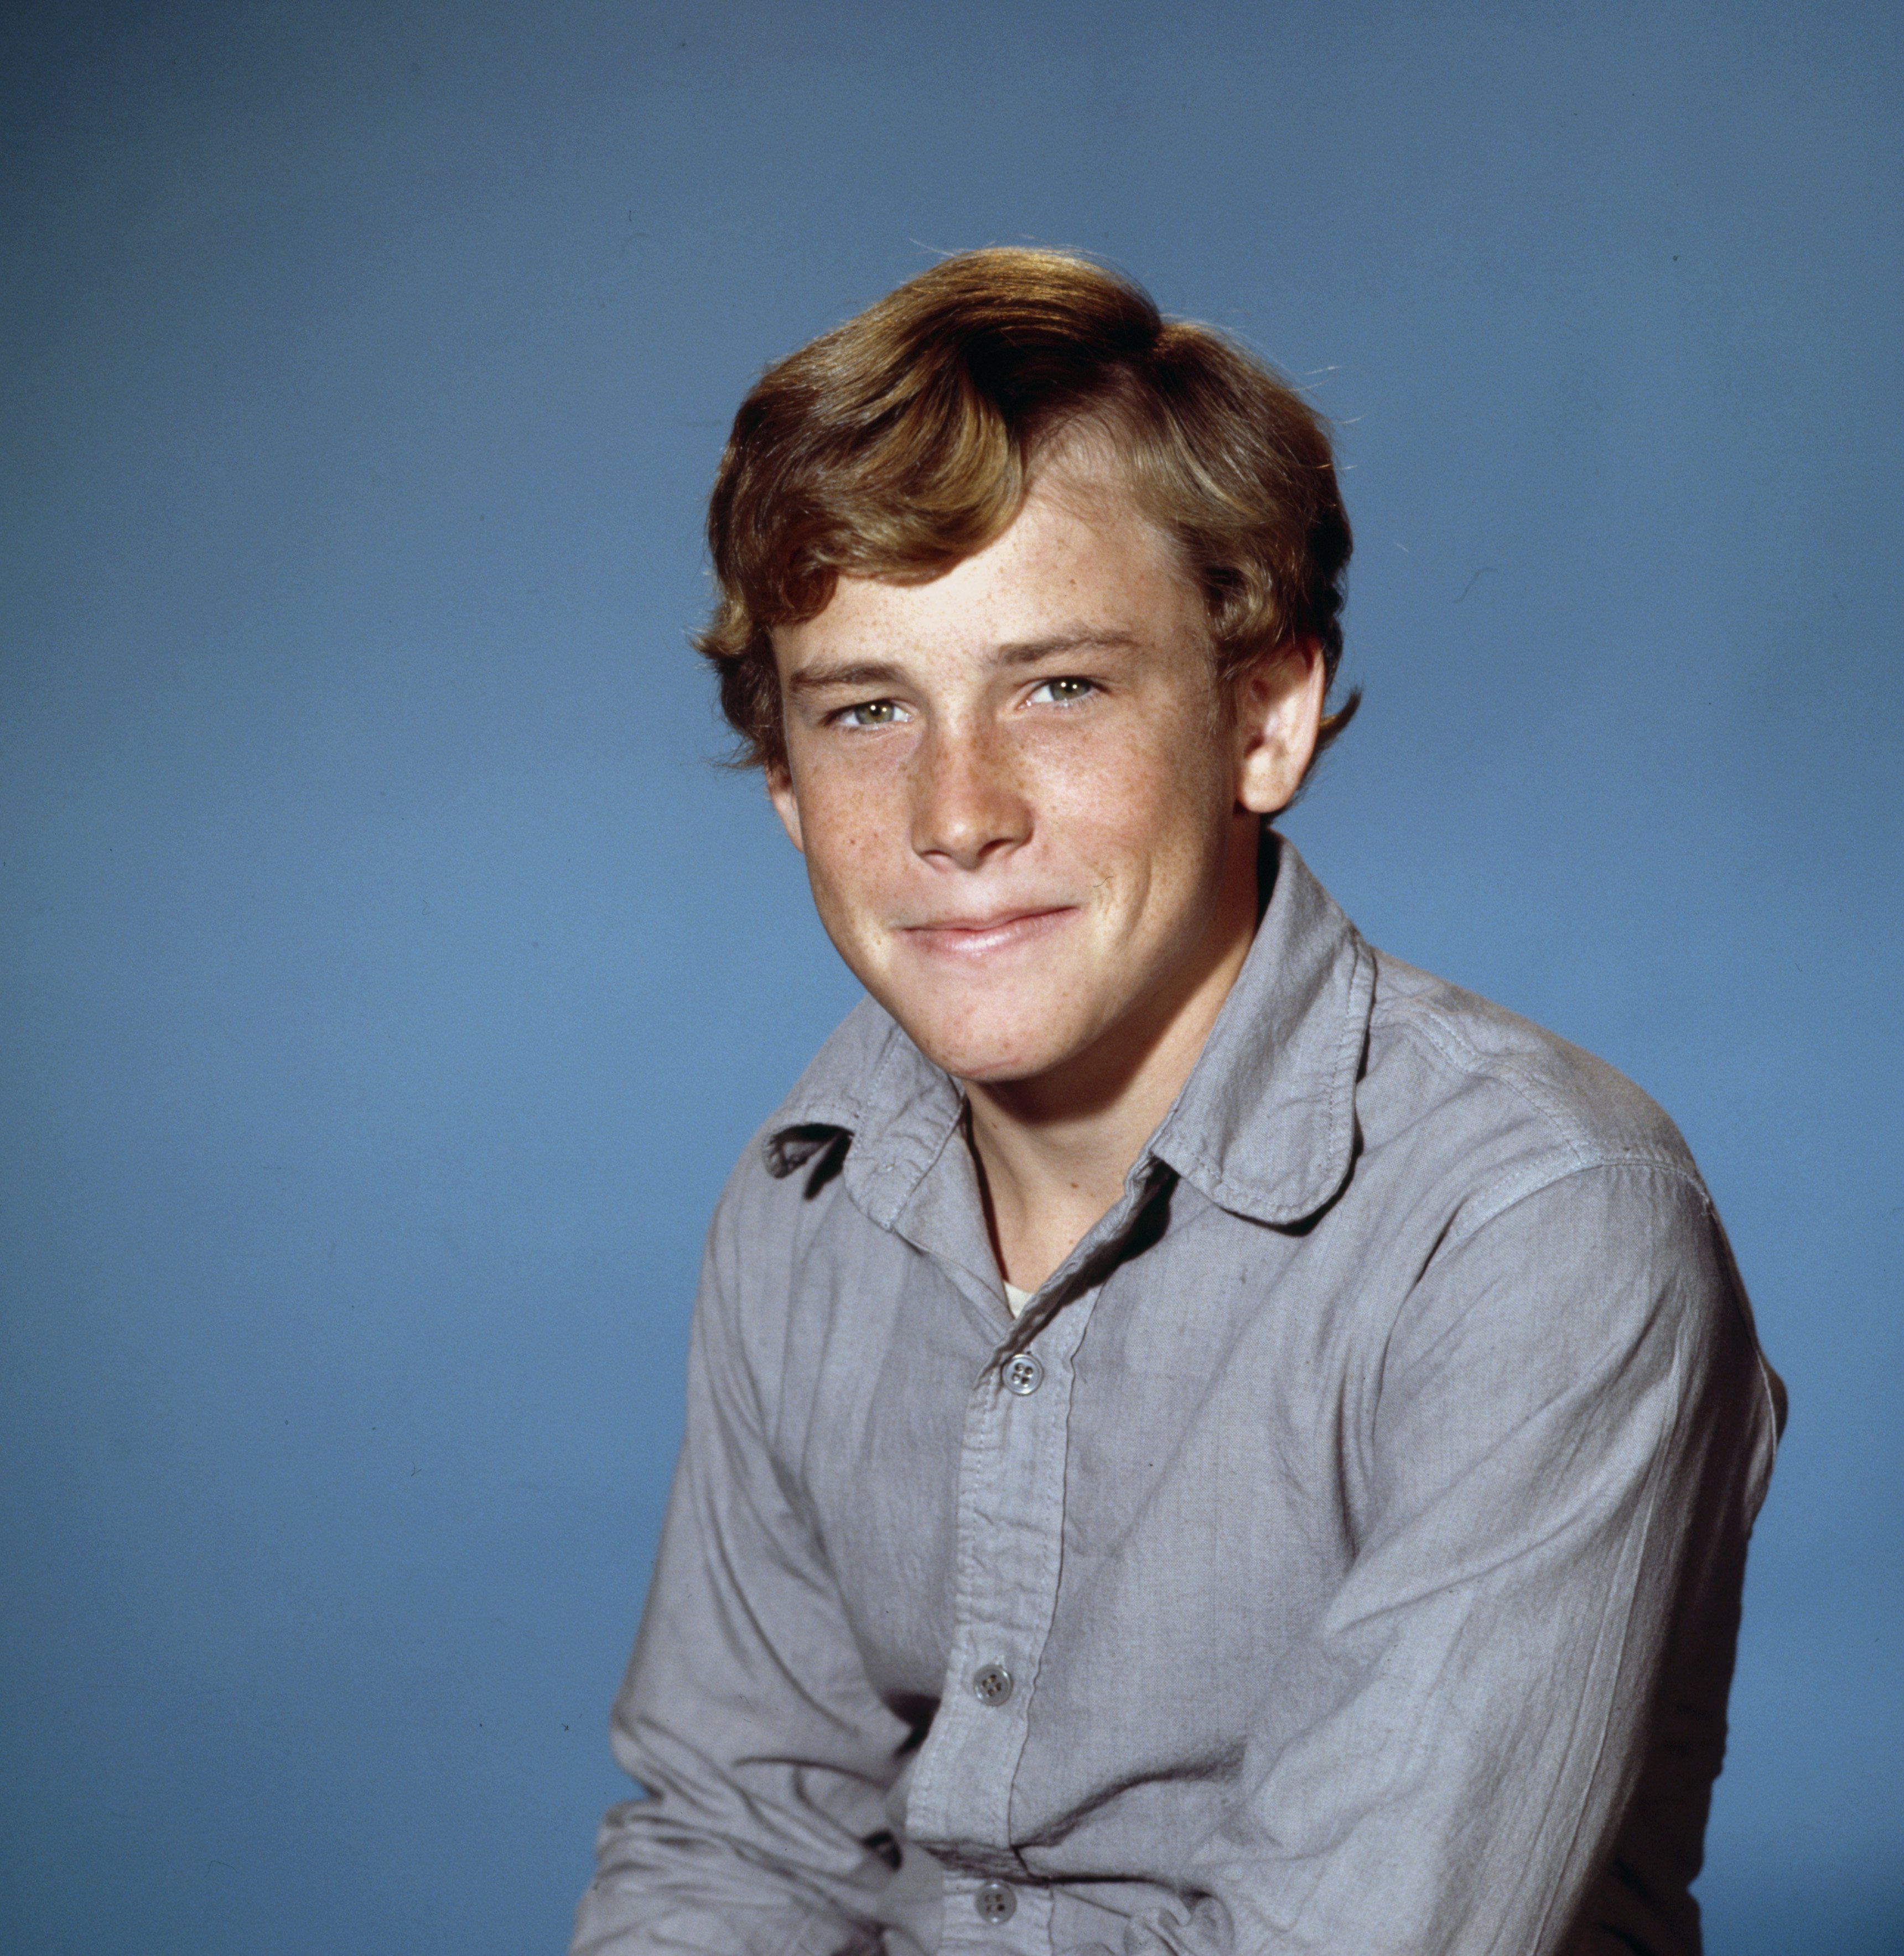 Willie Aames pose for a promotional photo for the ABC tv series 'Swiss Family Robinson'. | Source: Getty Images